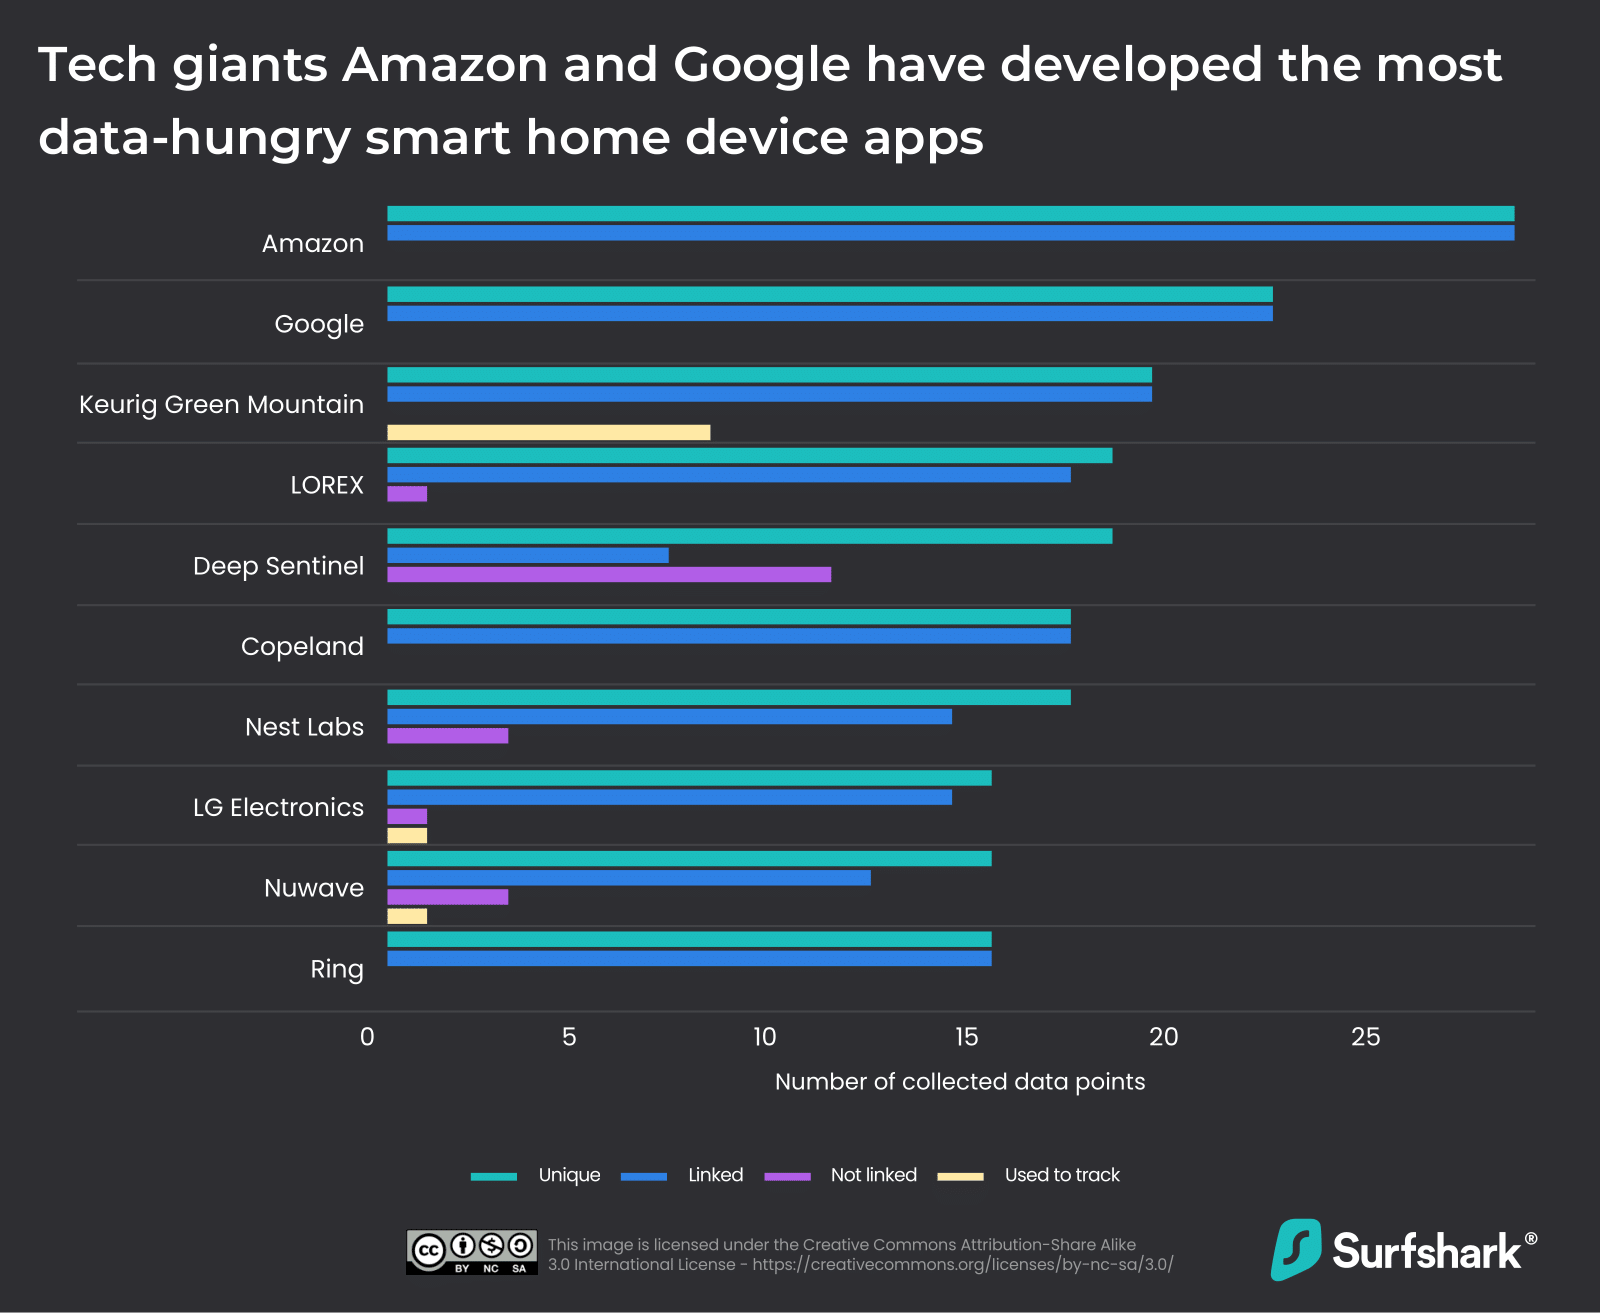 tech-giants-amazon-and-google-developed-most-data-hungry-apps-to-control-smart-home-devices